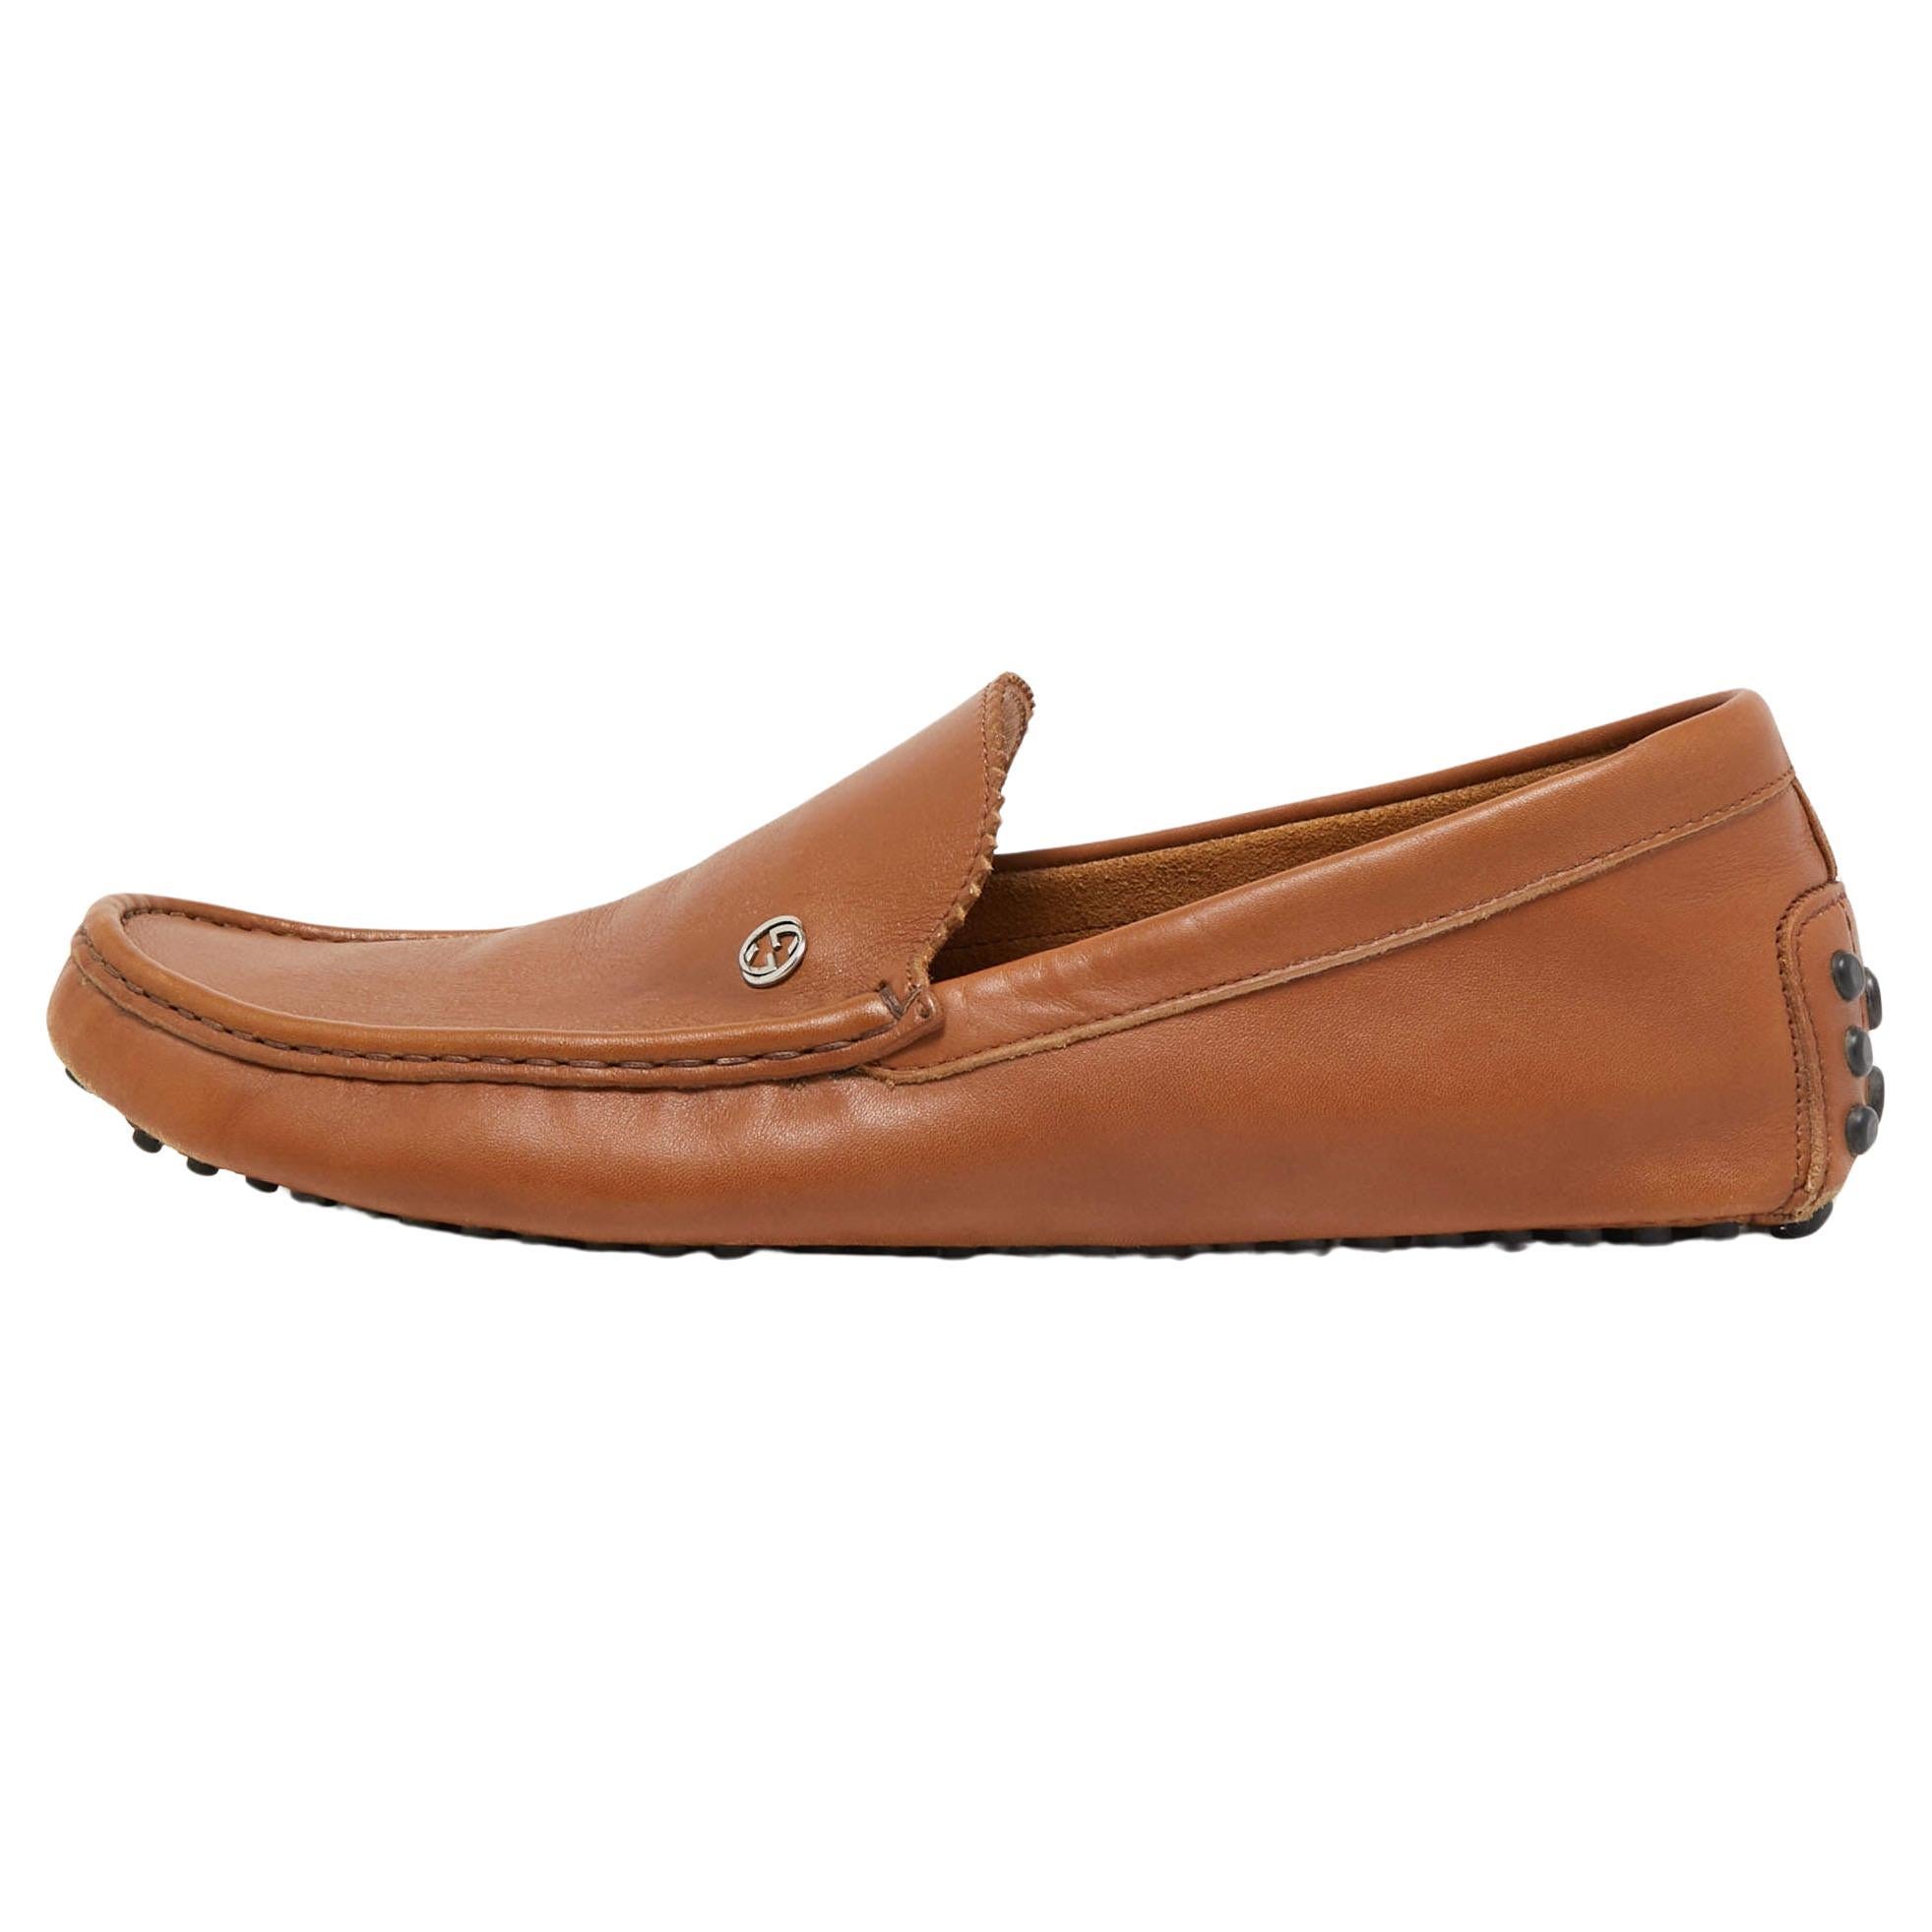 Gucci Brown Leather Slip On Loafers Size 43.5 For Sale